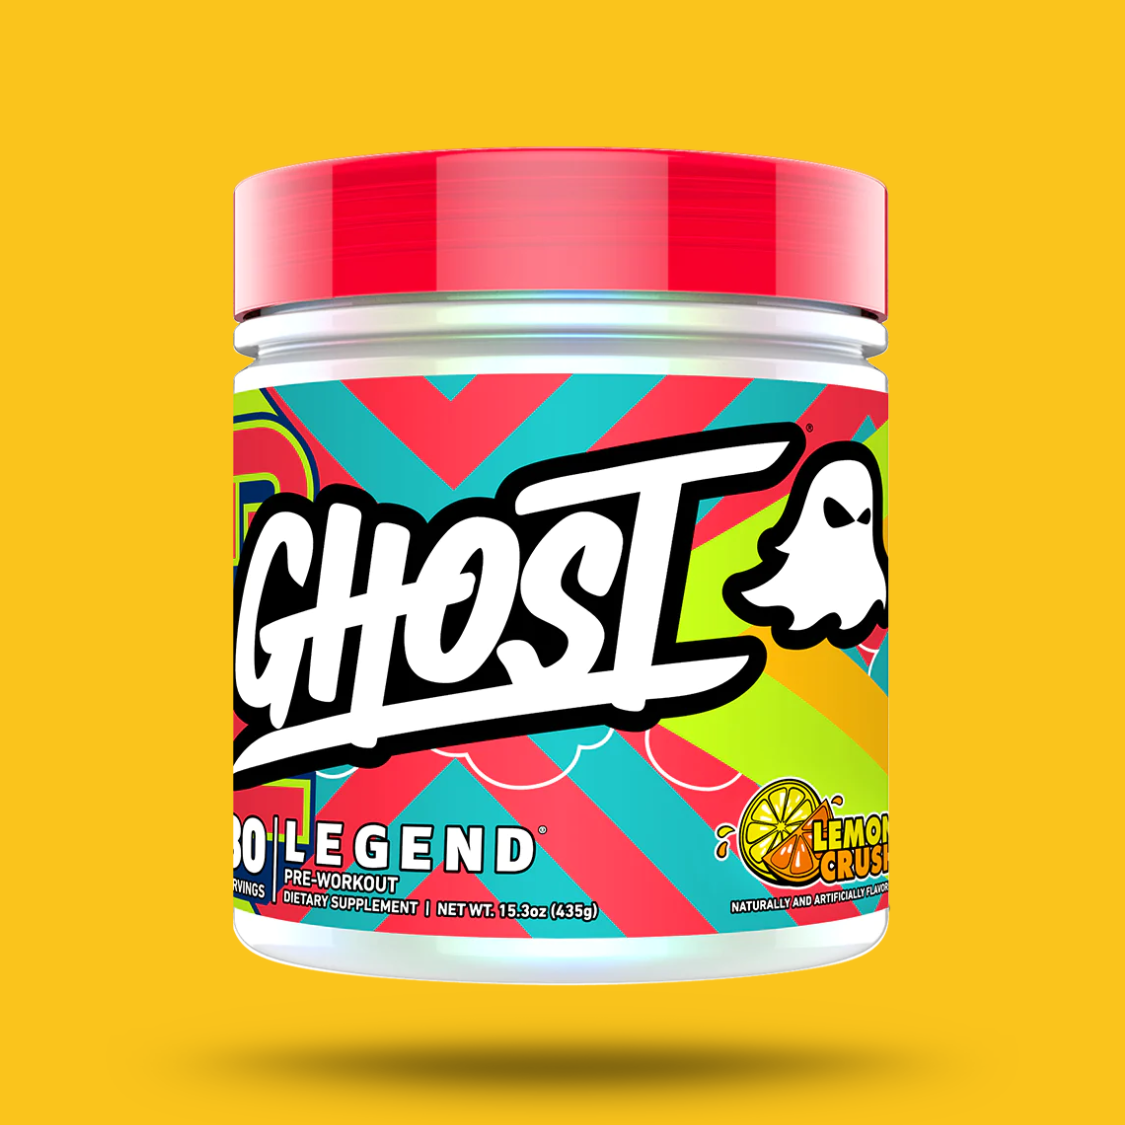 GHOST LEGEND PRE WORKOUT 30 SERV GHOST LIFESTYLE